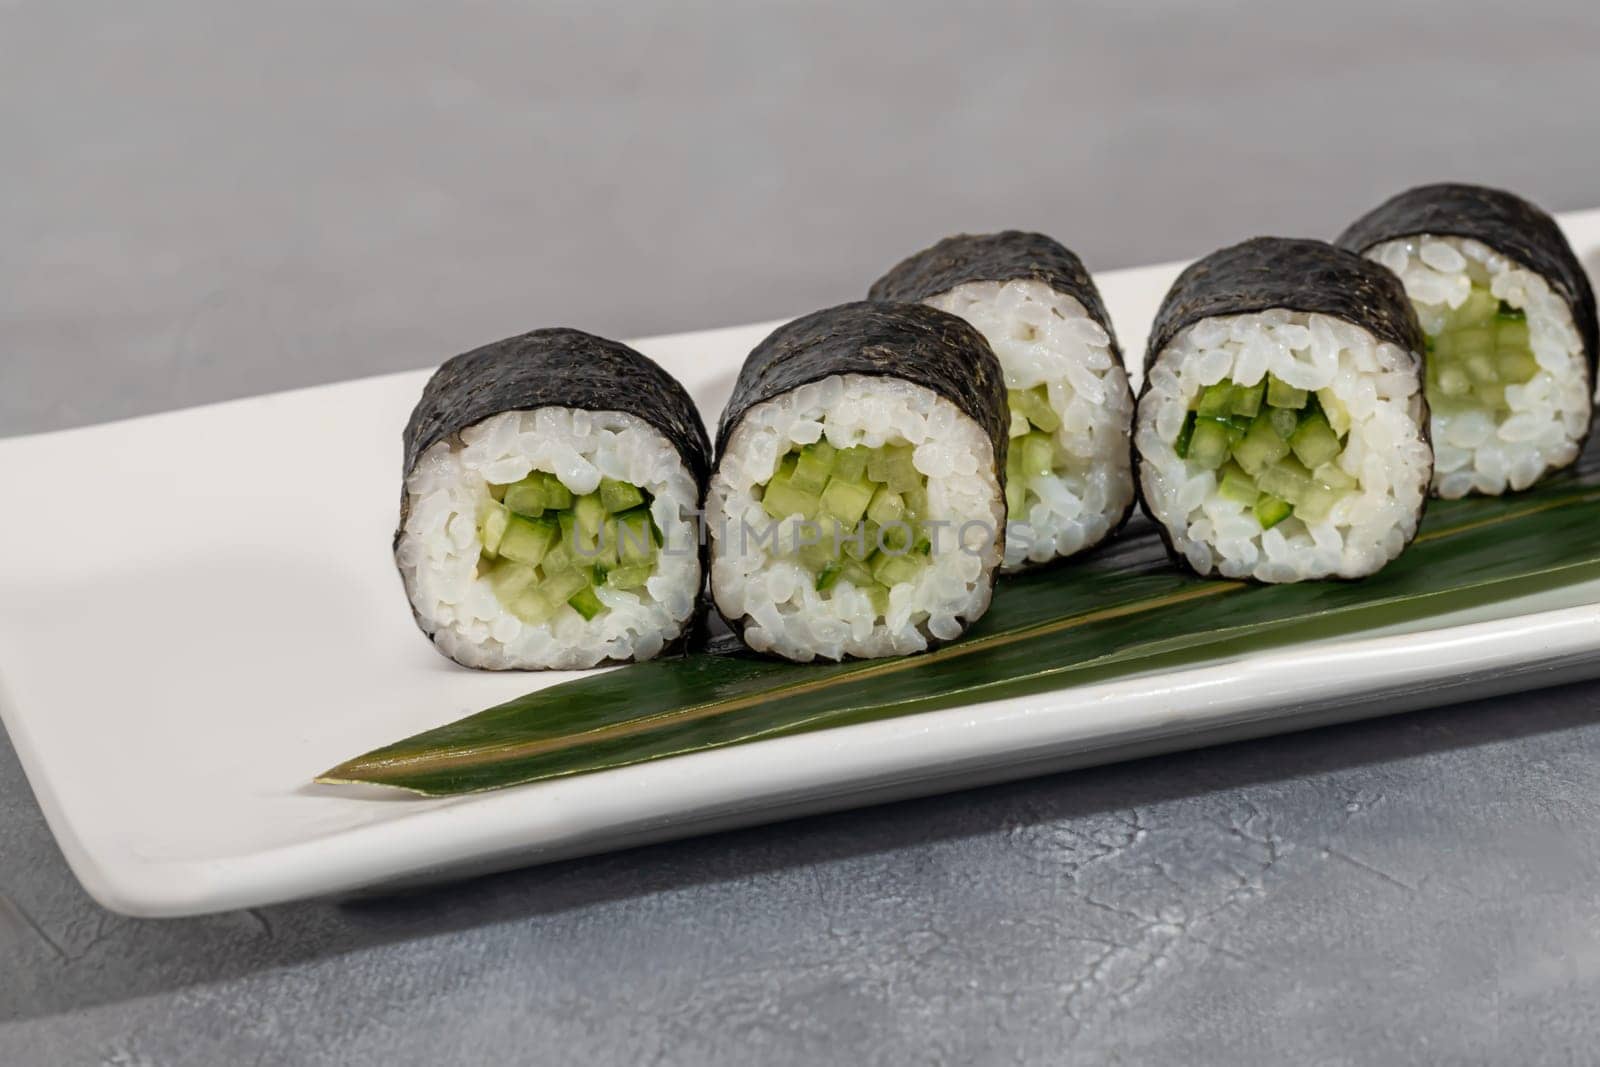 Sushi and rolls with caviar, shrimp and tuna, avocado on a gray background. by klimatis019